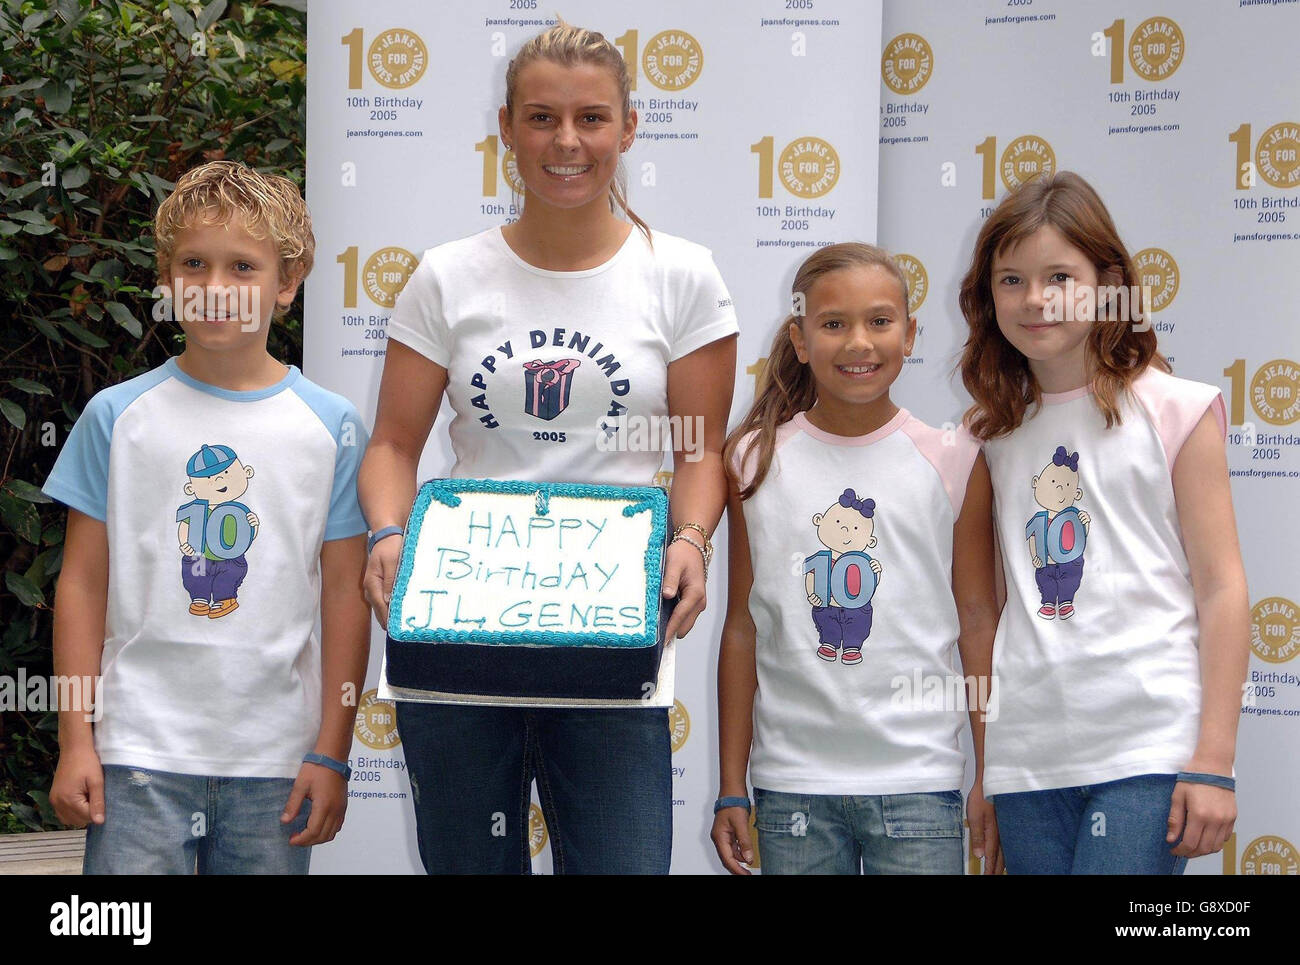 (From left to right) Luke Taylor from Brentwood, Coleen McLoughlin, Megan Craddock from Bedford and Sophie Olsen from St.Albans during a photocall at Great Ormond Street Hospital in central London Tuesday 4 October 2005, to officially launch the 10th anniversary of Jeans for Gene's Day, which will take place on Friday. The event raises funds for children with genetic conditions around the UK. Coleen's sister, Rosie, suffers from Rett Syndrome and the Rett Syndrome Association is a benefiting charity. PRESS ASSOCIATION PHOTO. Photo credit should read: Ian West/PA Stock Photo